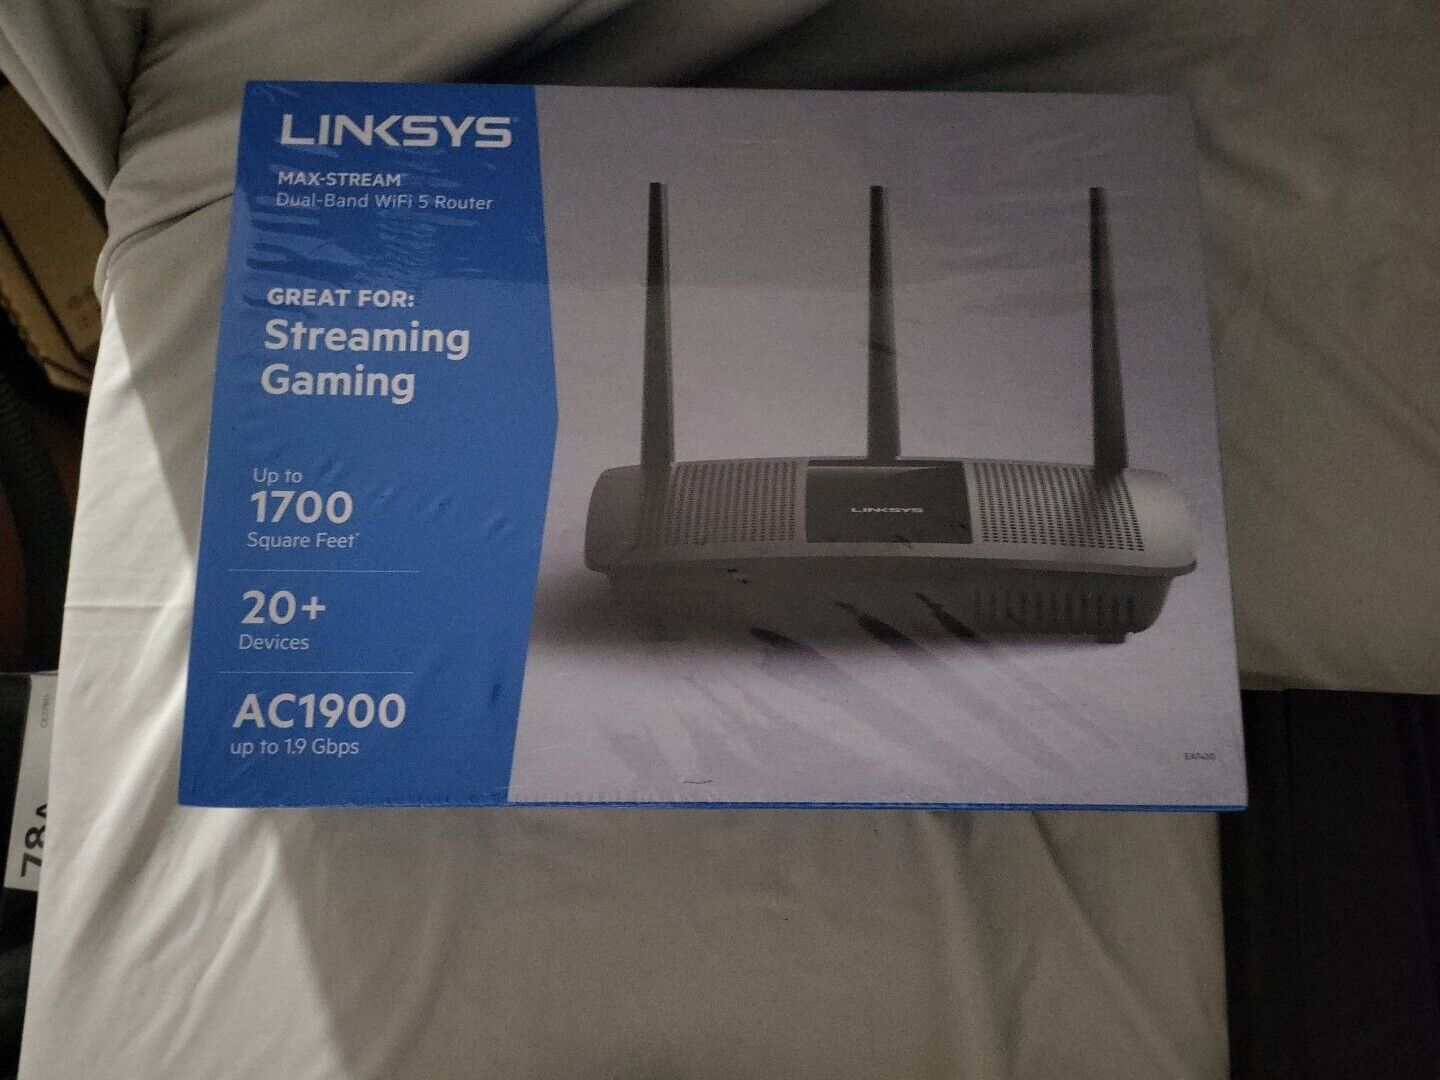 Linksys R74 EA7450 Max-Stream AC1900 Wireless Dual-Band Gigabit Router - New